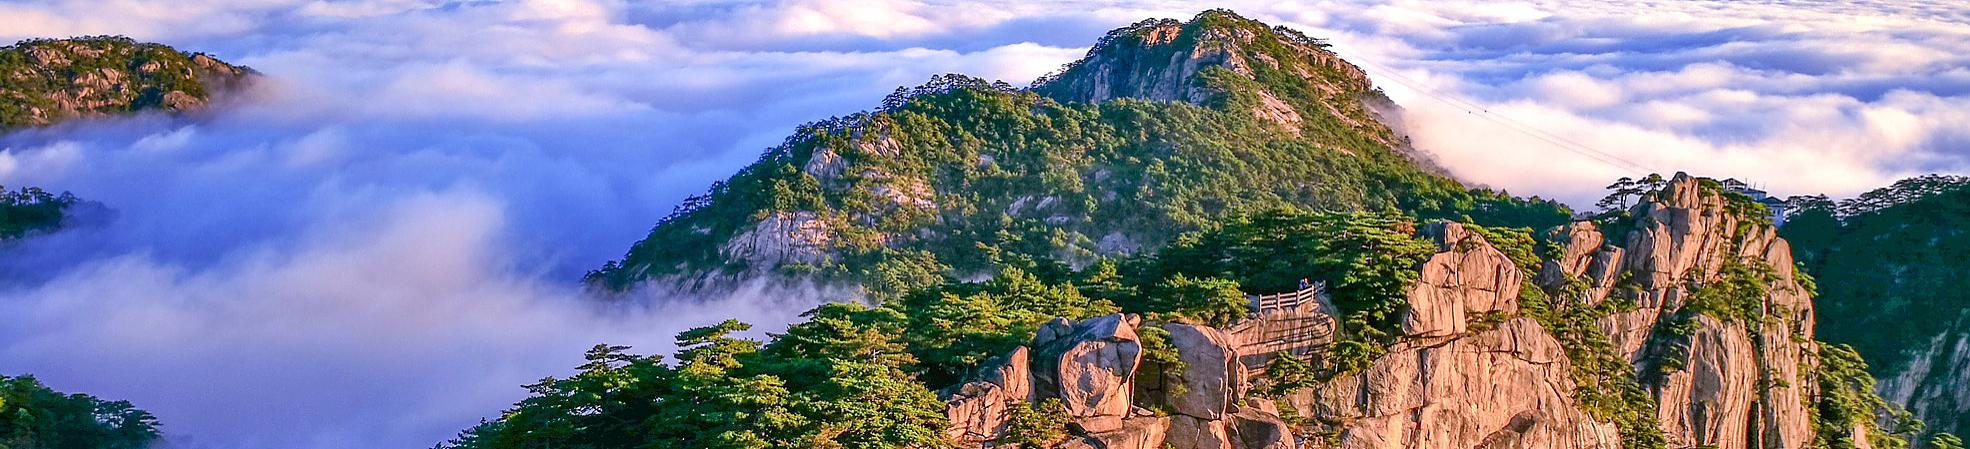 Pine Valley Scenic Area of Huangshan Mountain